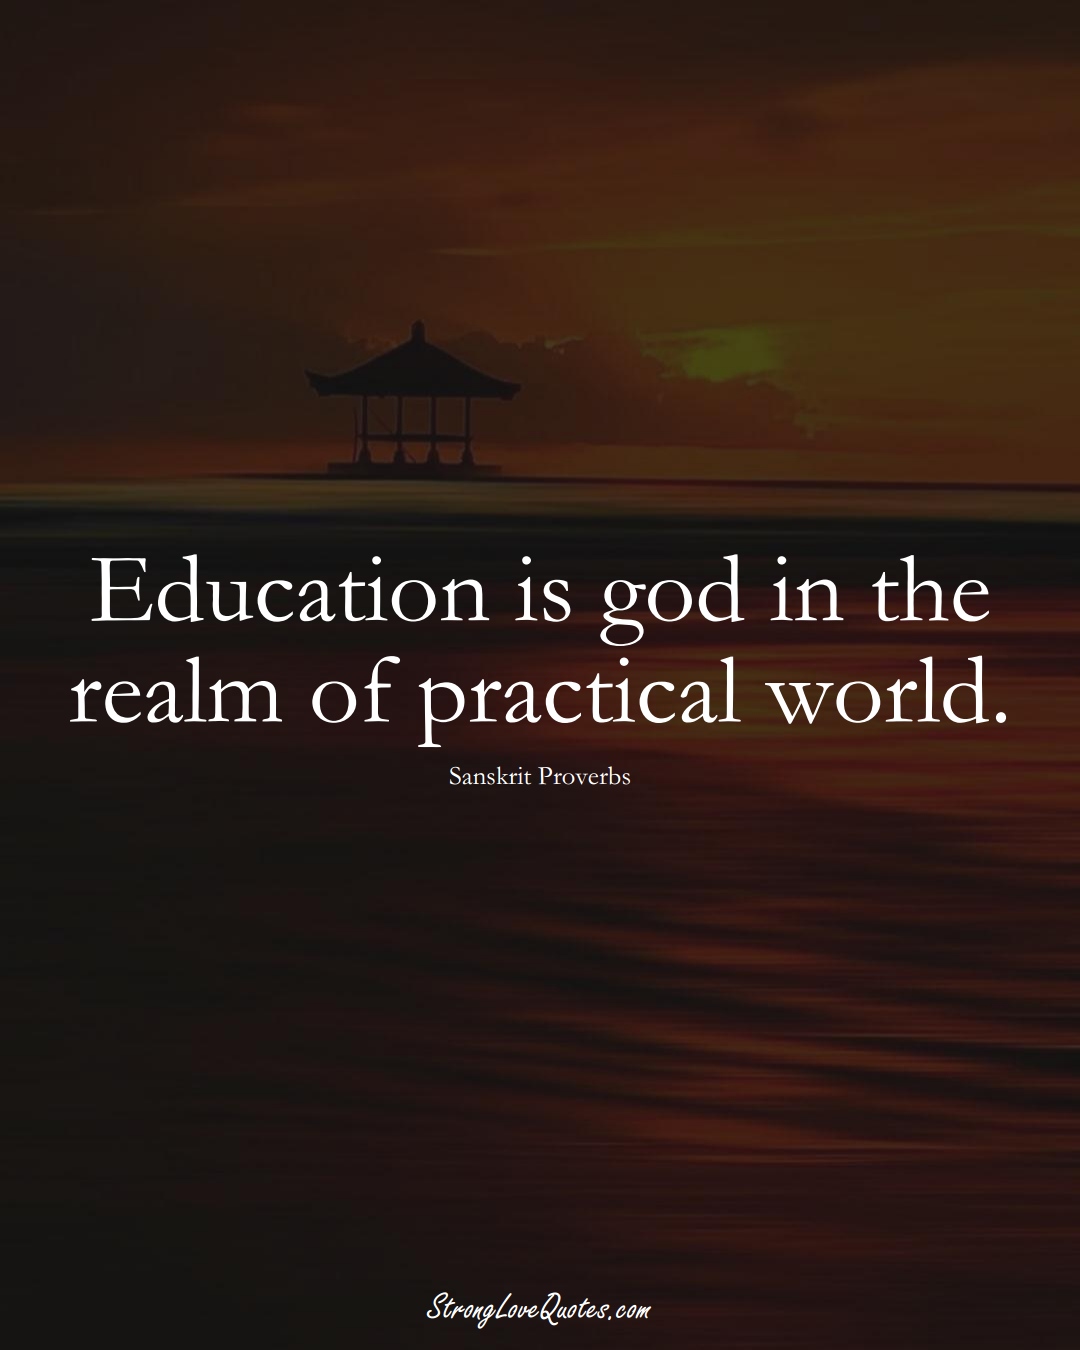 Education is god in the realm of practical world. (Sanskrit Sayings);  #aVarietyofCulturesSayings